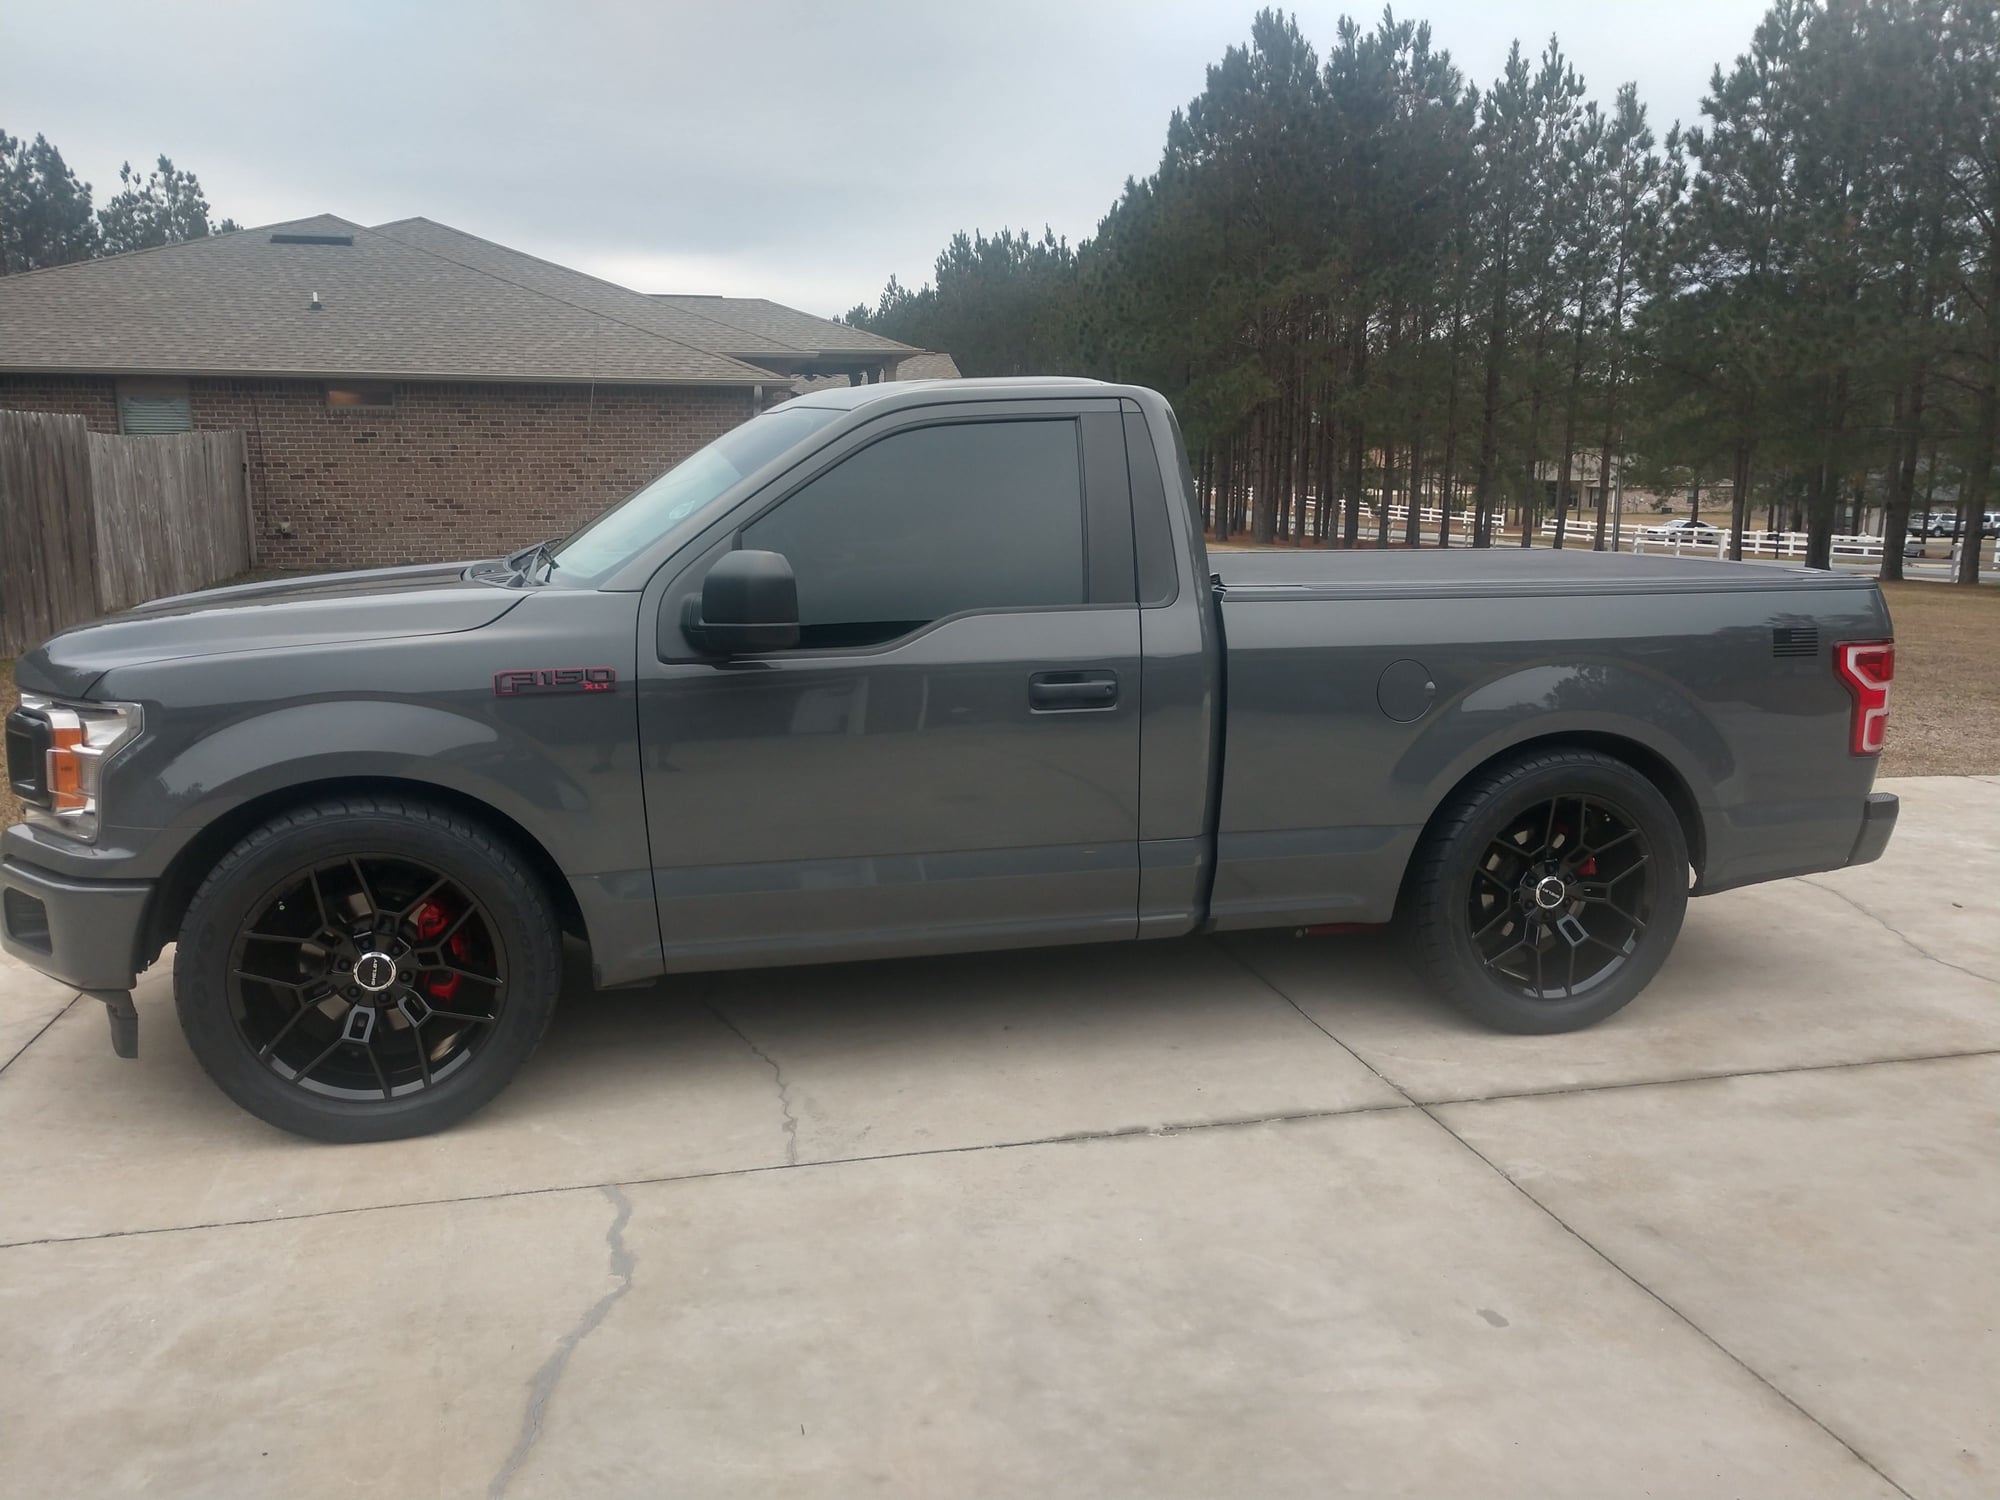 Rcsb 3 5 5 Lowering Kit Will They Fit Page 2 Ford F150 Forum Community Of Ford Truck Fans